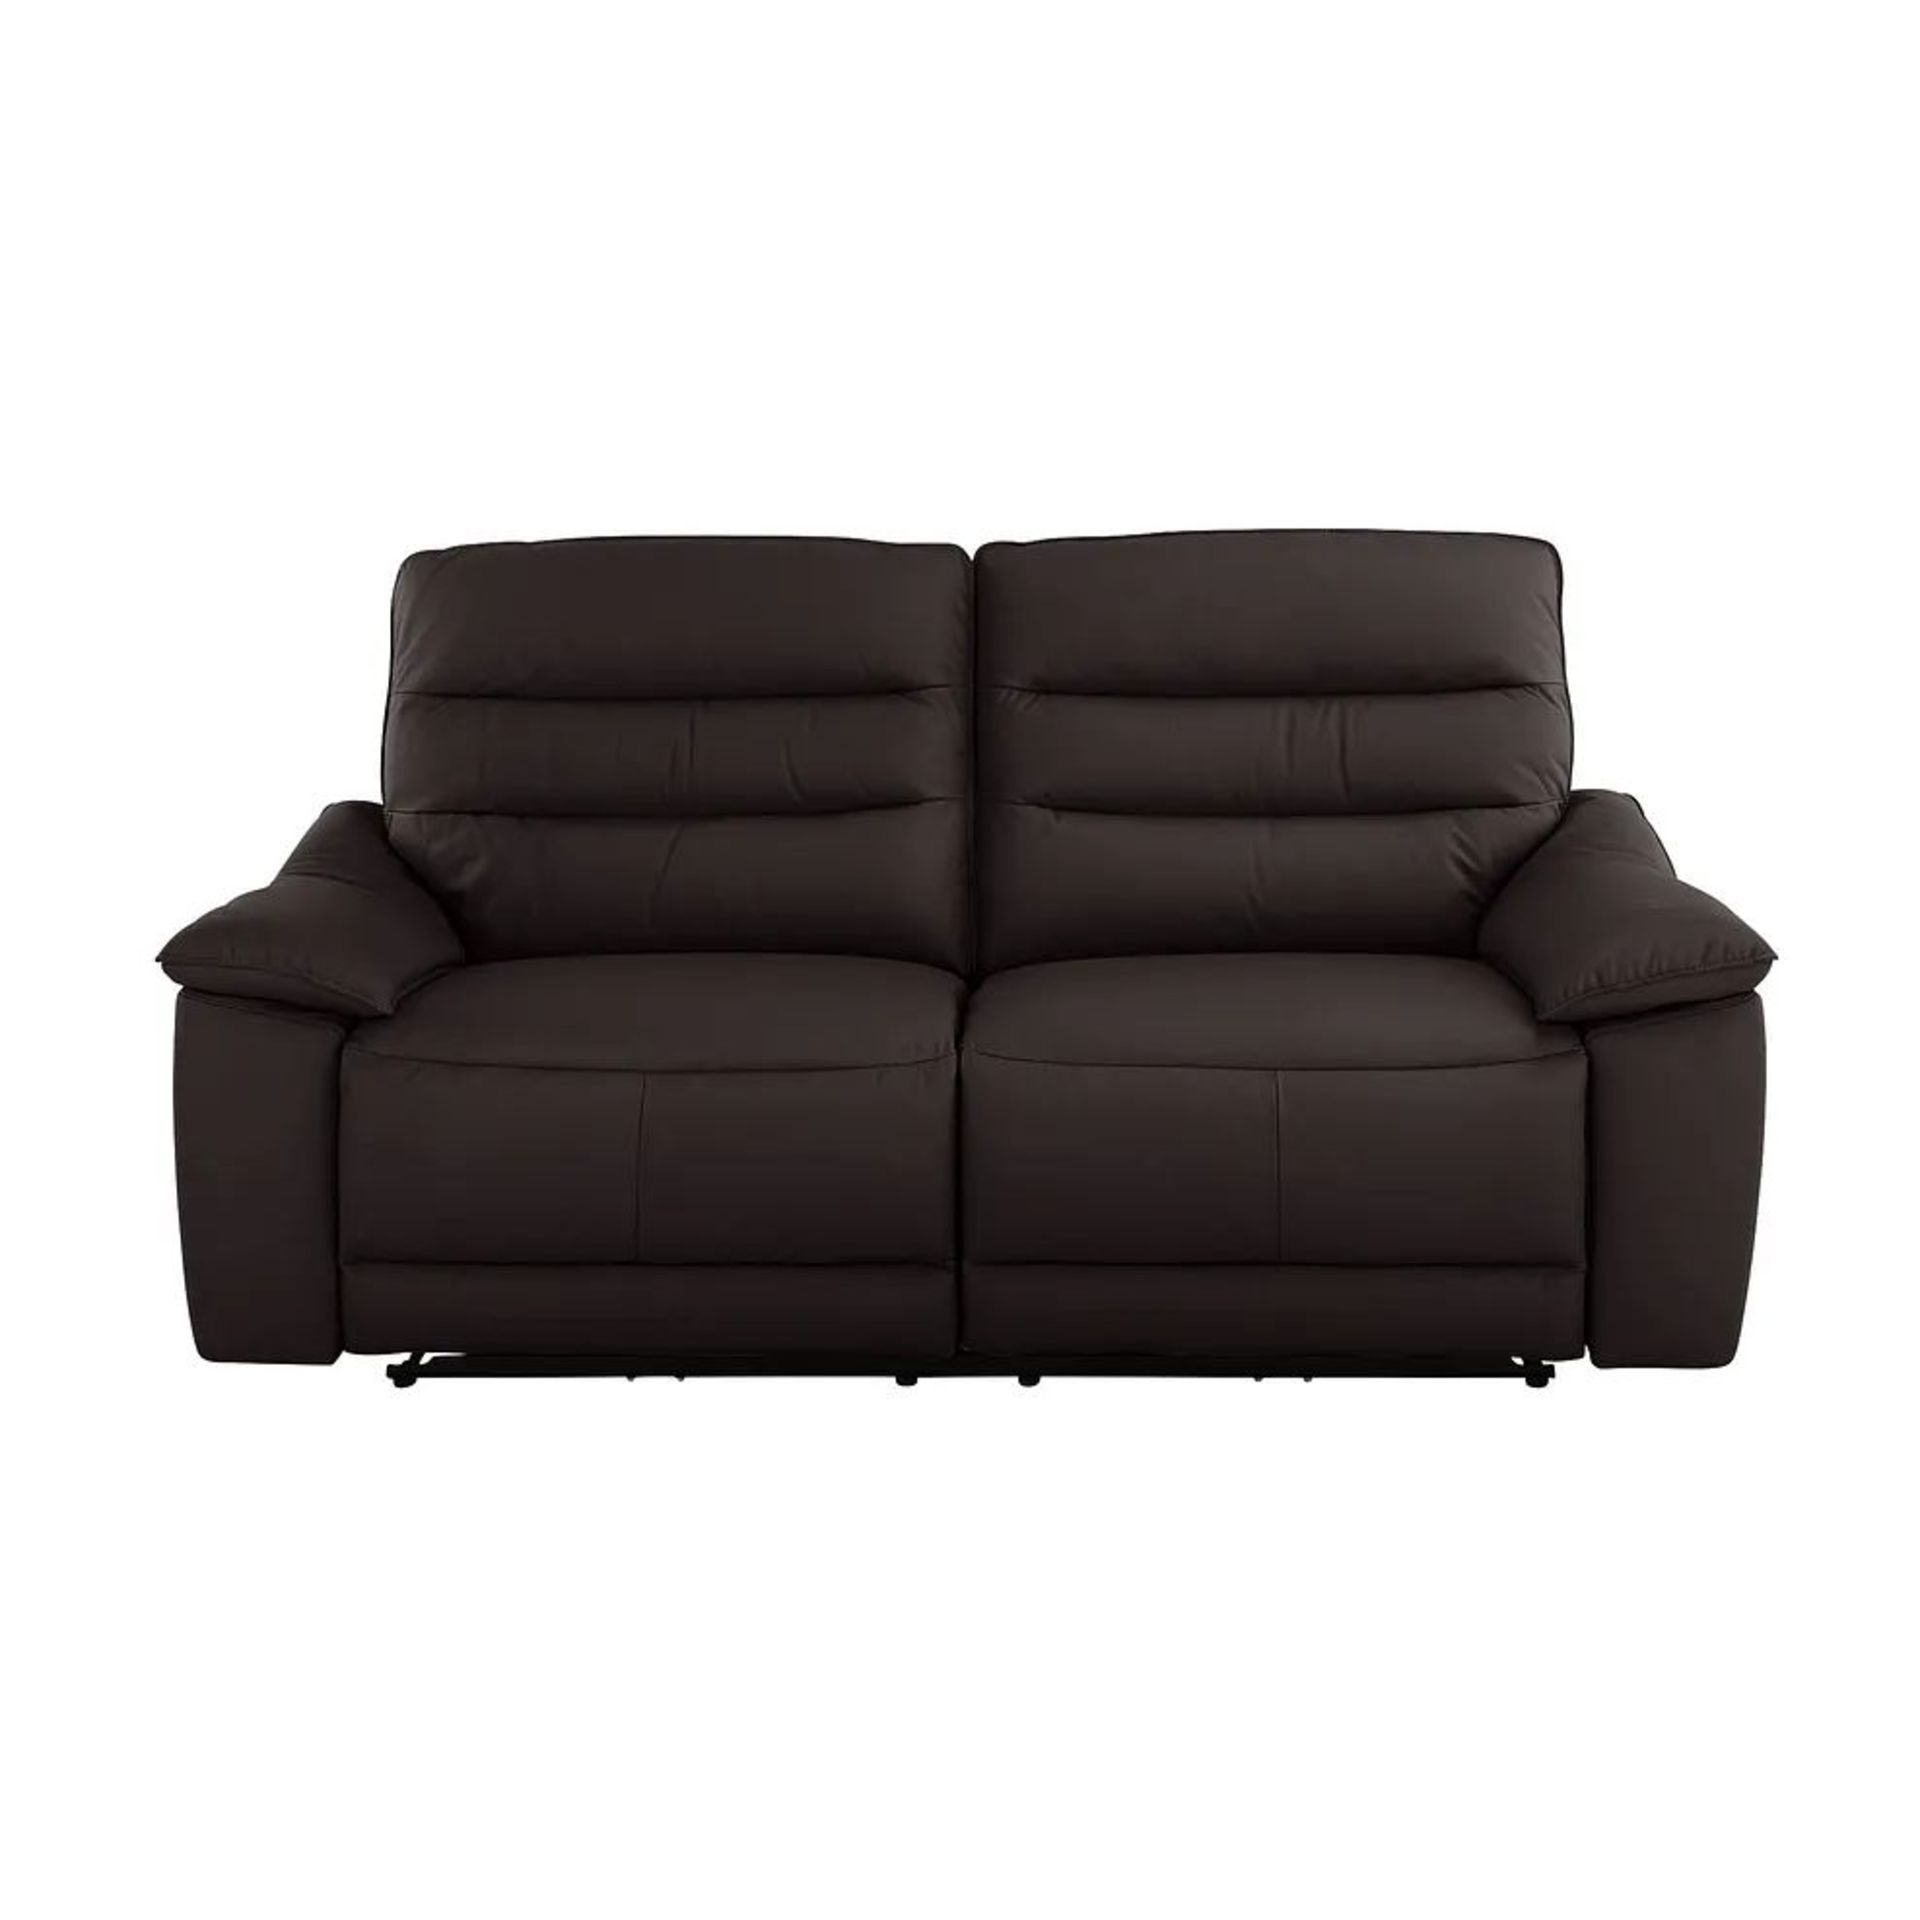 BRAND NEW CARTER 3 Seater Electric Recliner Sofa - BROWN LEATHER. RRP £1699. Showcasing classic - Image 2 of 11